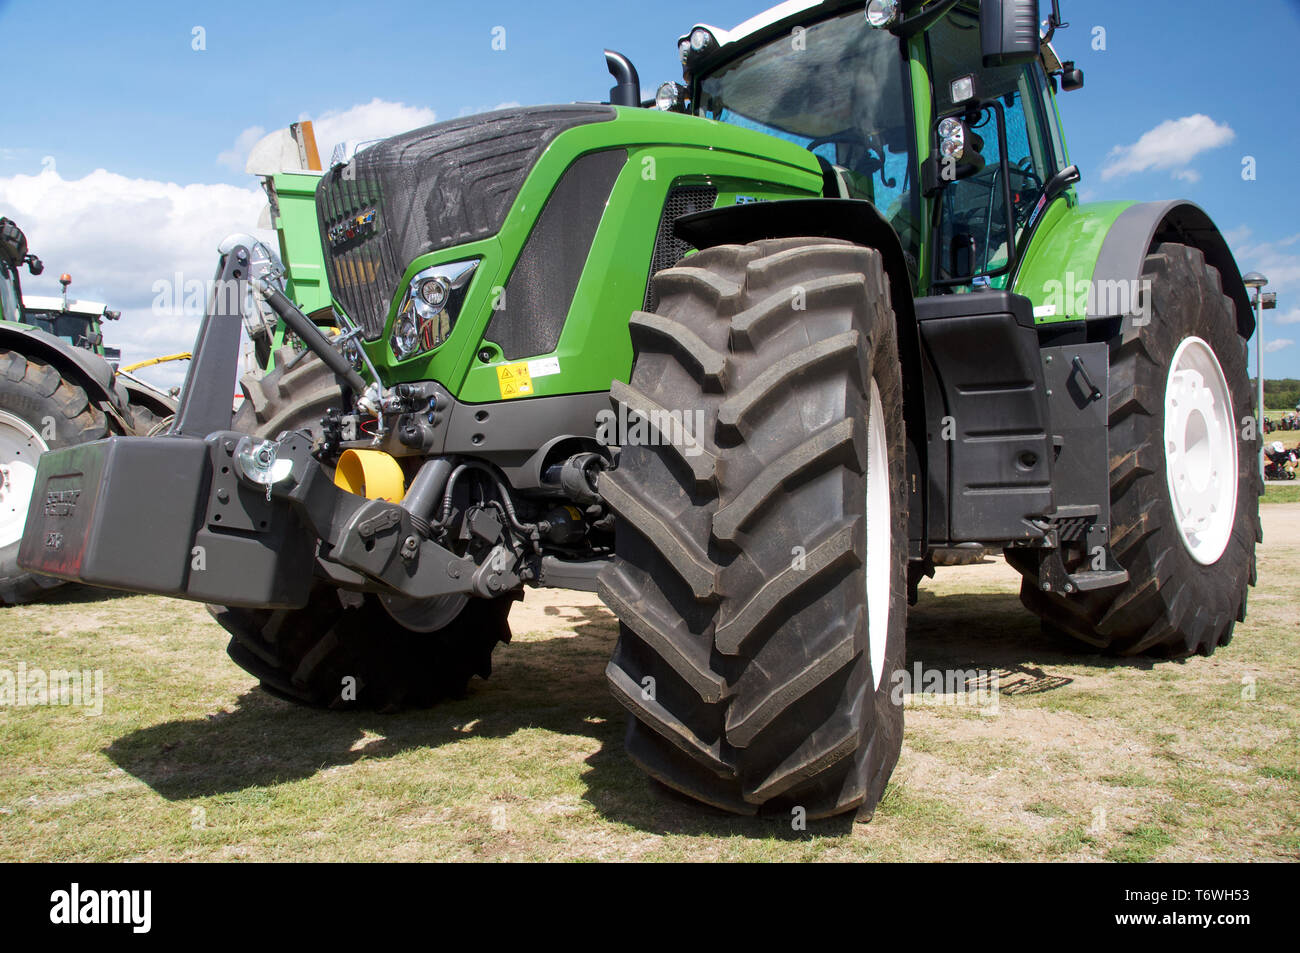 Large green tractor Stock Photo